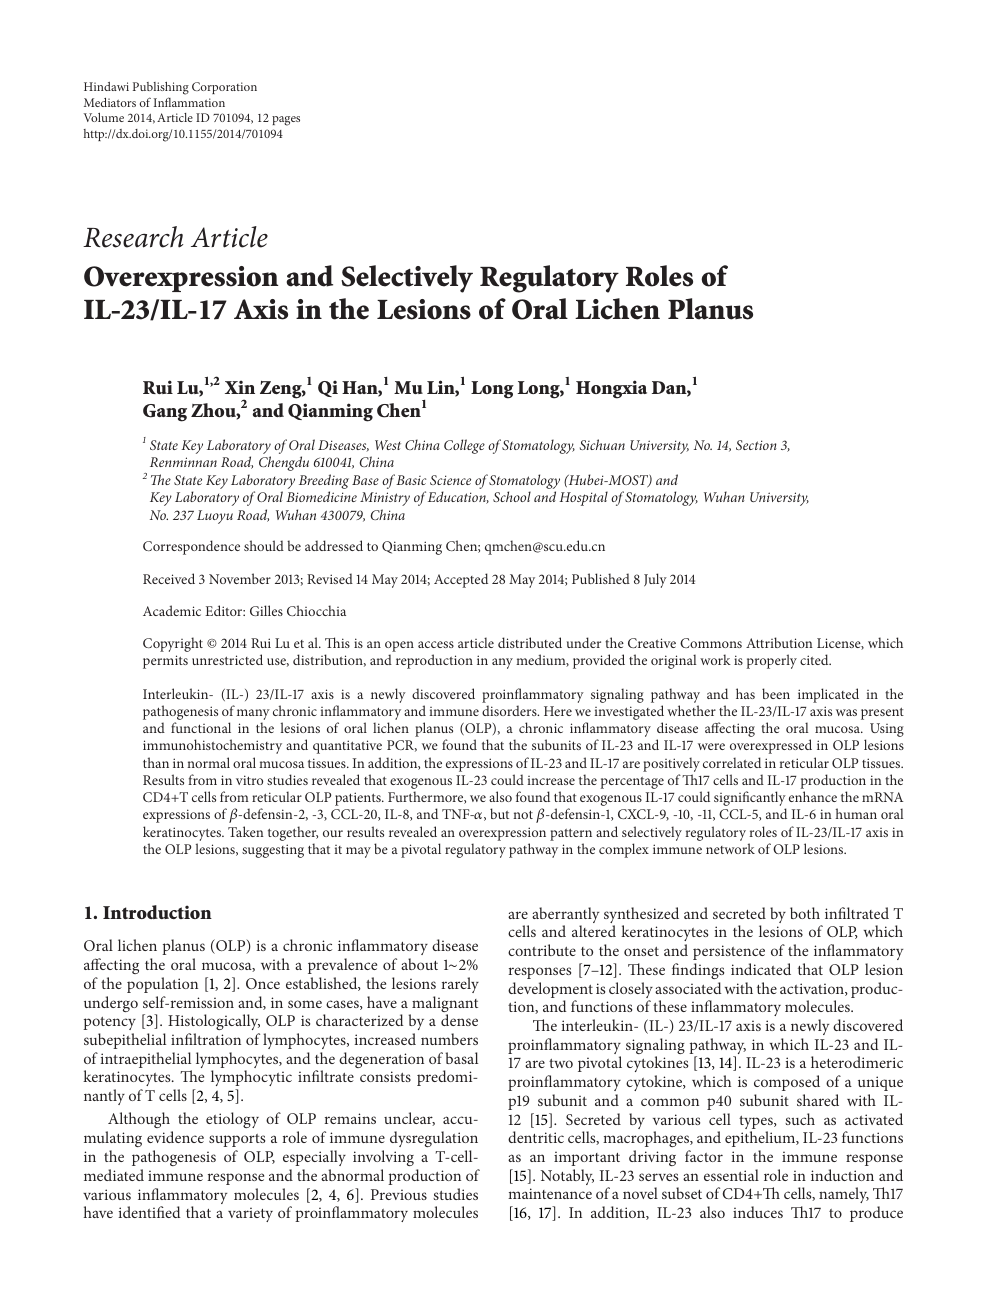 Overexpression And Selectively Regulatory Roles Of Il 23 Il 17 Axis In The Lesions Of Oral Lichen Planus Topic Of Research Paper In Biological Sciences Download Scholarly Article Pdf And Read For Free On